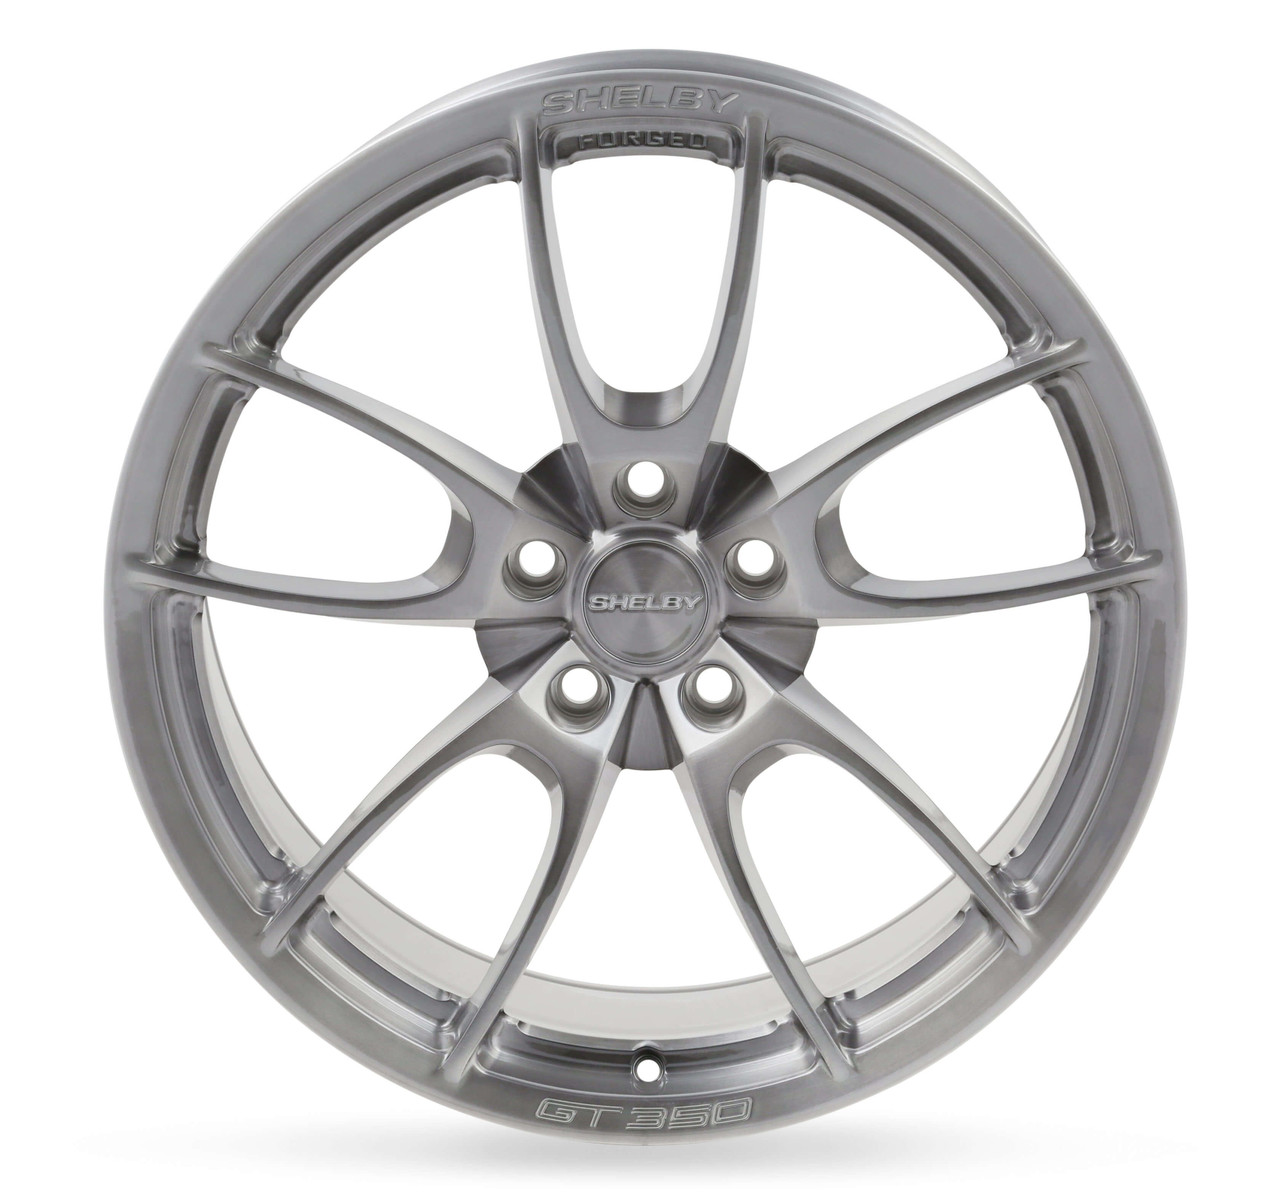 CS21-911460-TR Carroll Shelby Wheels 19 x 11in 5 x 114.3 60mm Offset Smoked Tint